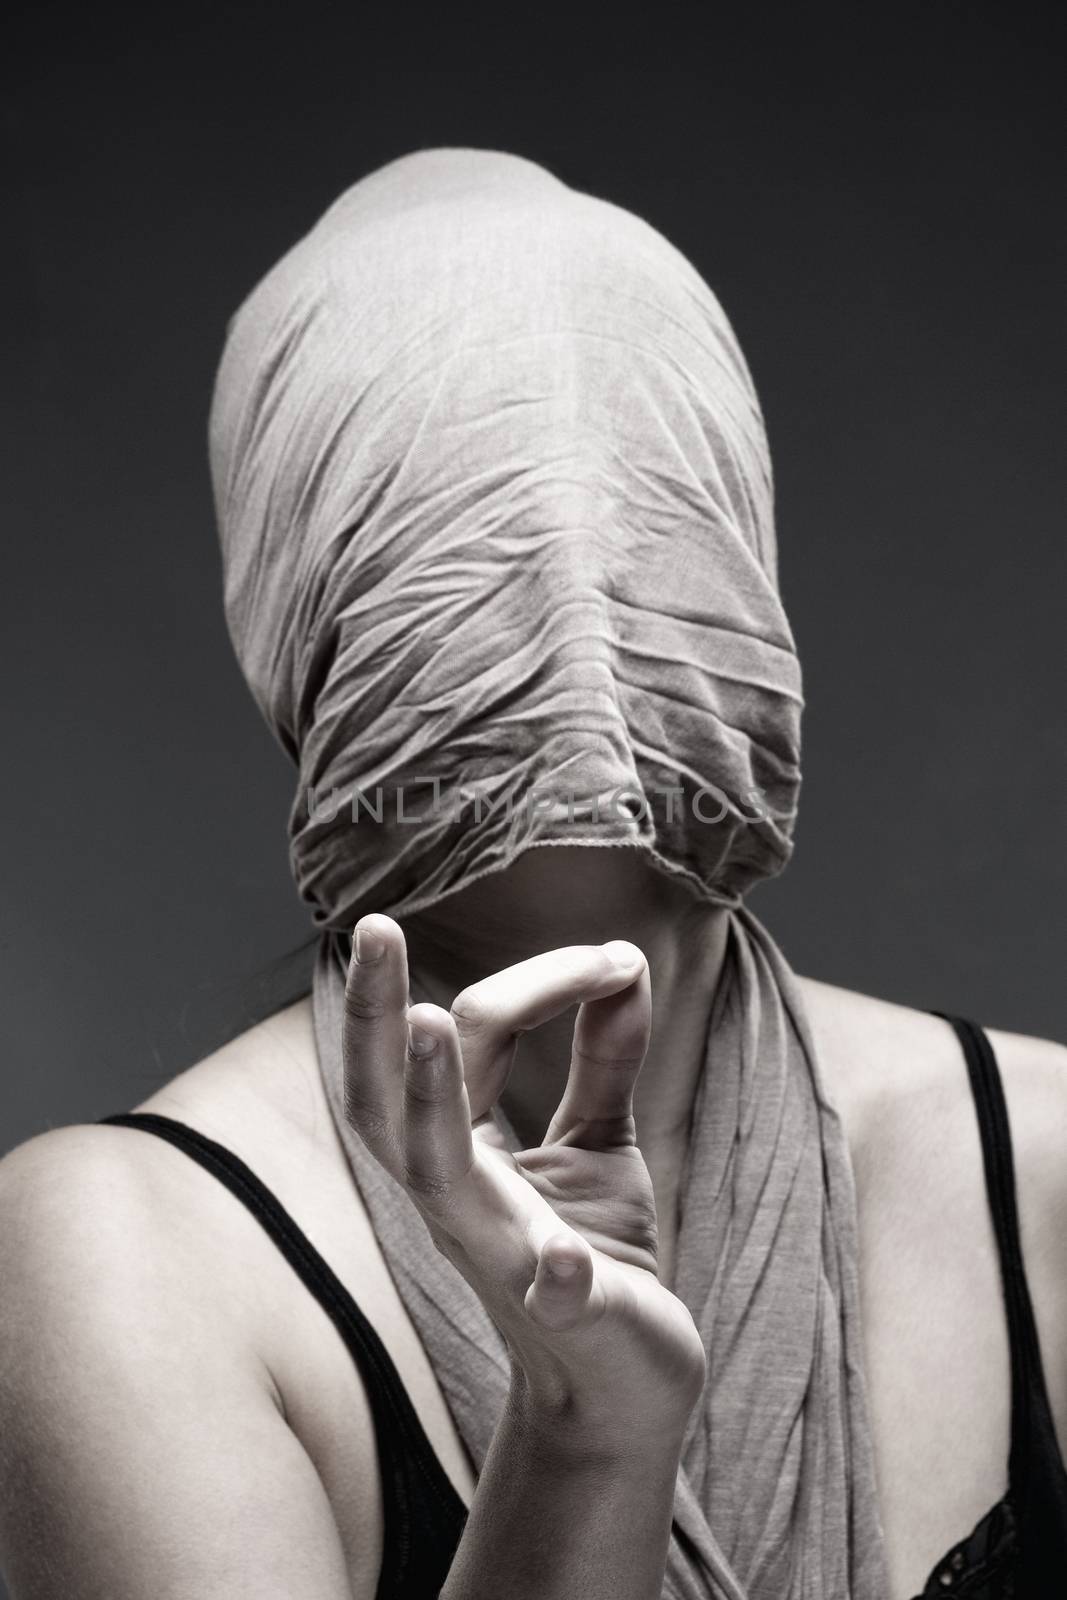 Woman Covering Face with Cloth, Making Hand Sign by courtyardpix